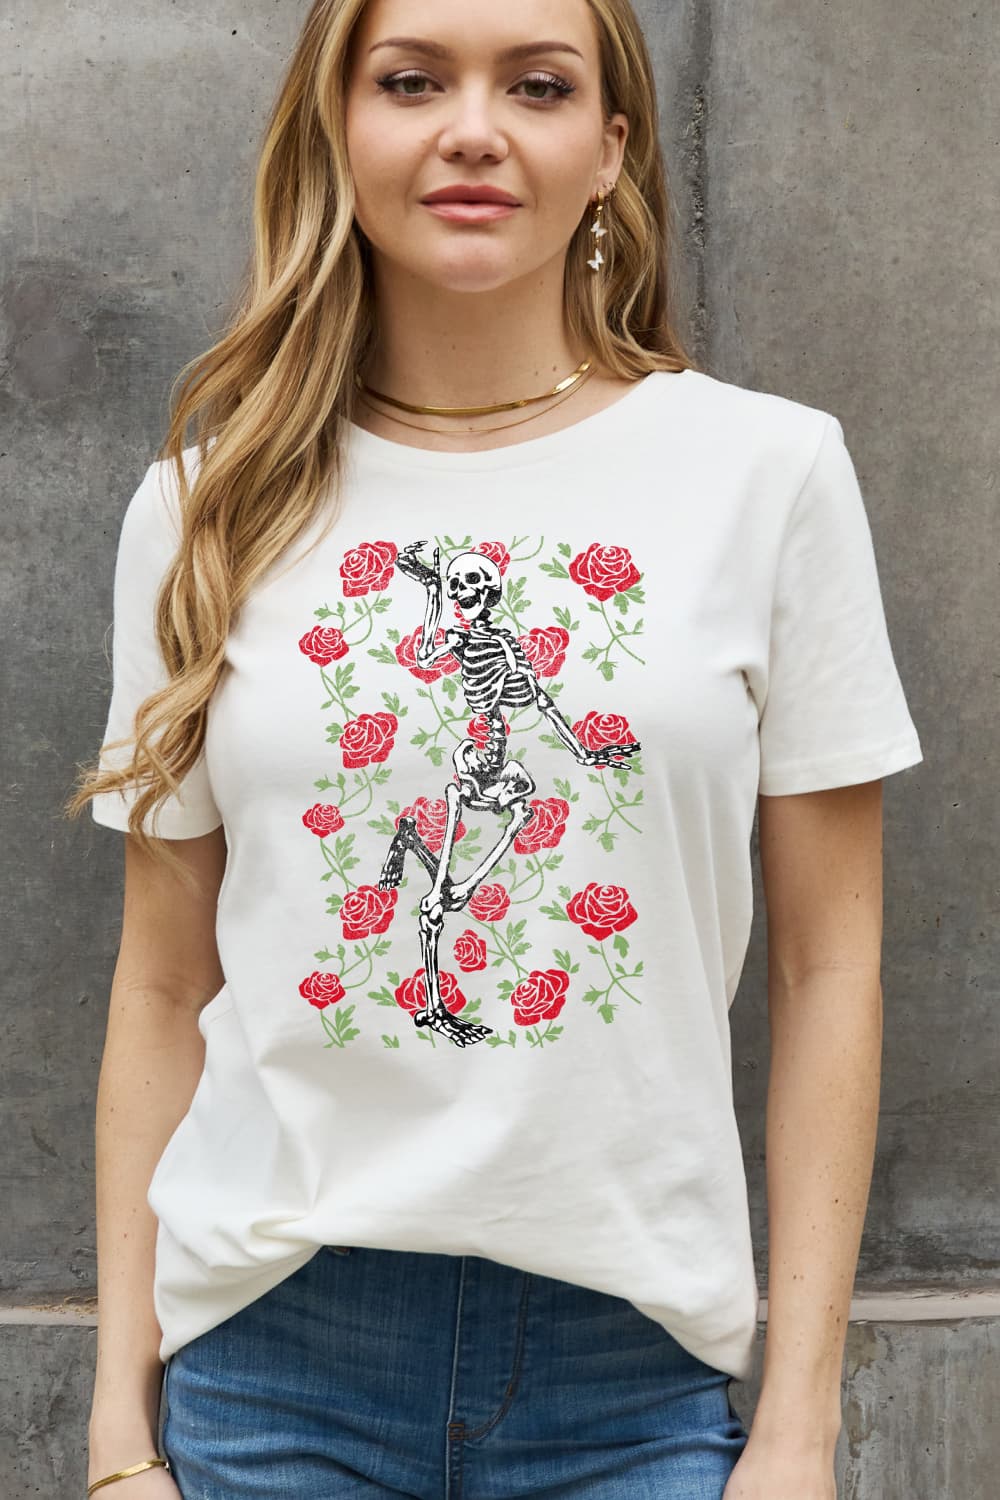 Simply Love Full Size Skeleton & Rose Graphic Cotton Tee